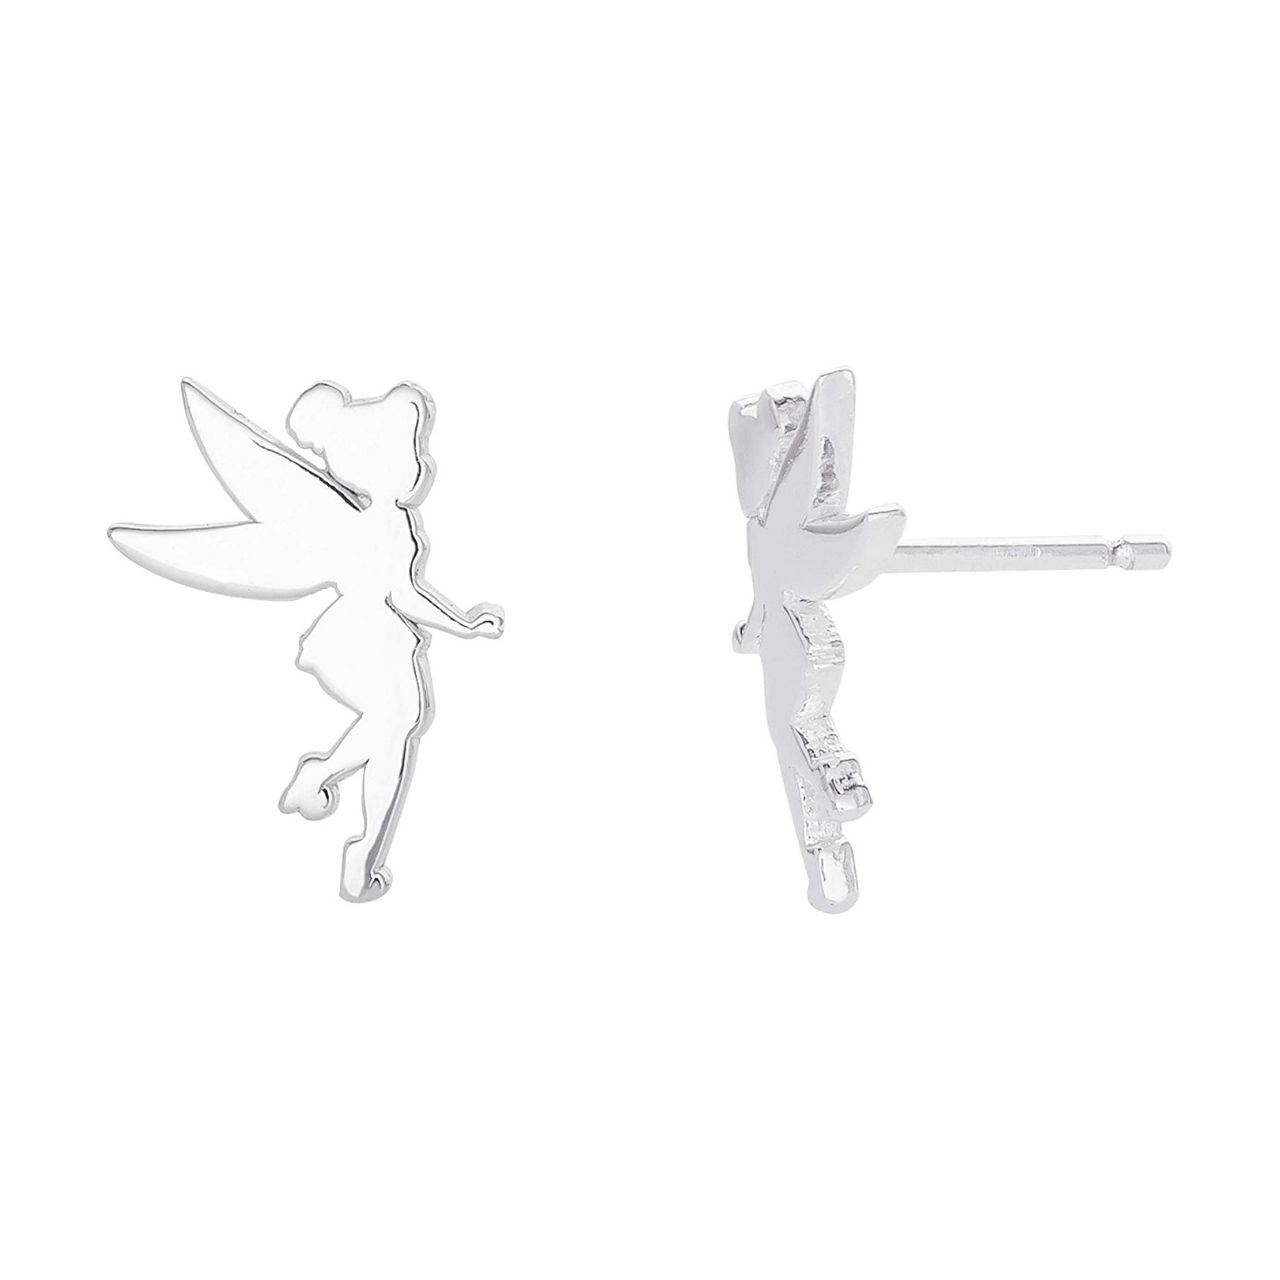 Disney Tinkerbell Silhouette Sterling Silver Stud Earrings Princess Collection  Disney Princess Collection, add that magical look with these amazing and instantly recognizable famous silhouette of Tinkerbell.  Trendy and fashionable design, the Disney Princess collection, sterling silver earrings add a chic, fun touch to any outfit.